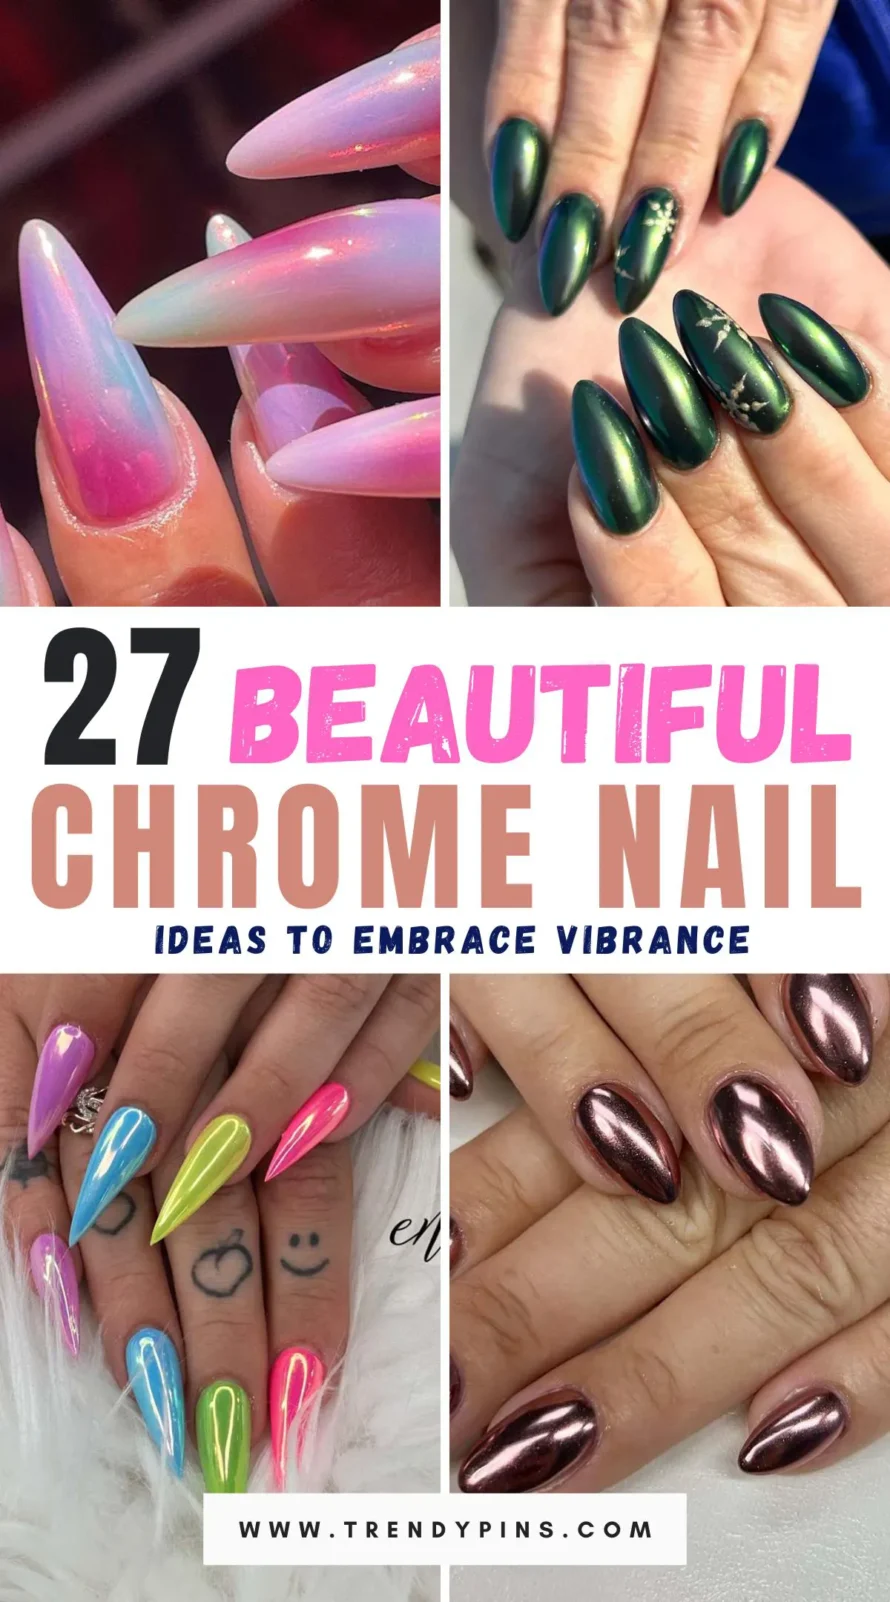 Discover 27 stunning and vibrant chrome nail ideas to elevate your manicure. Get inspired with bold colors and eye-catching designs perfect for any occasion!